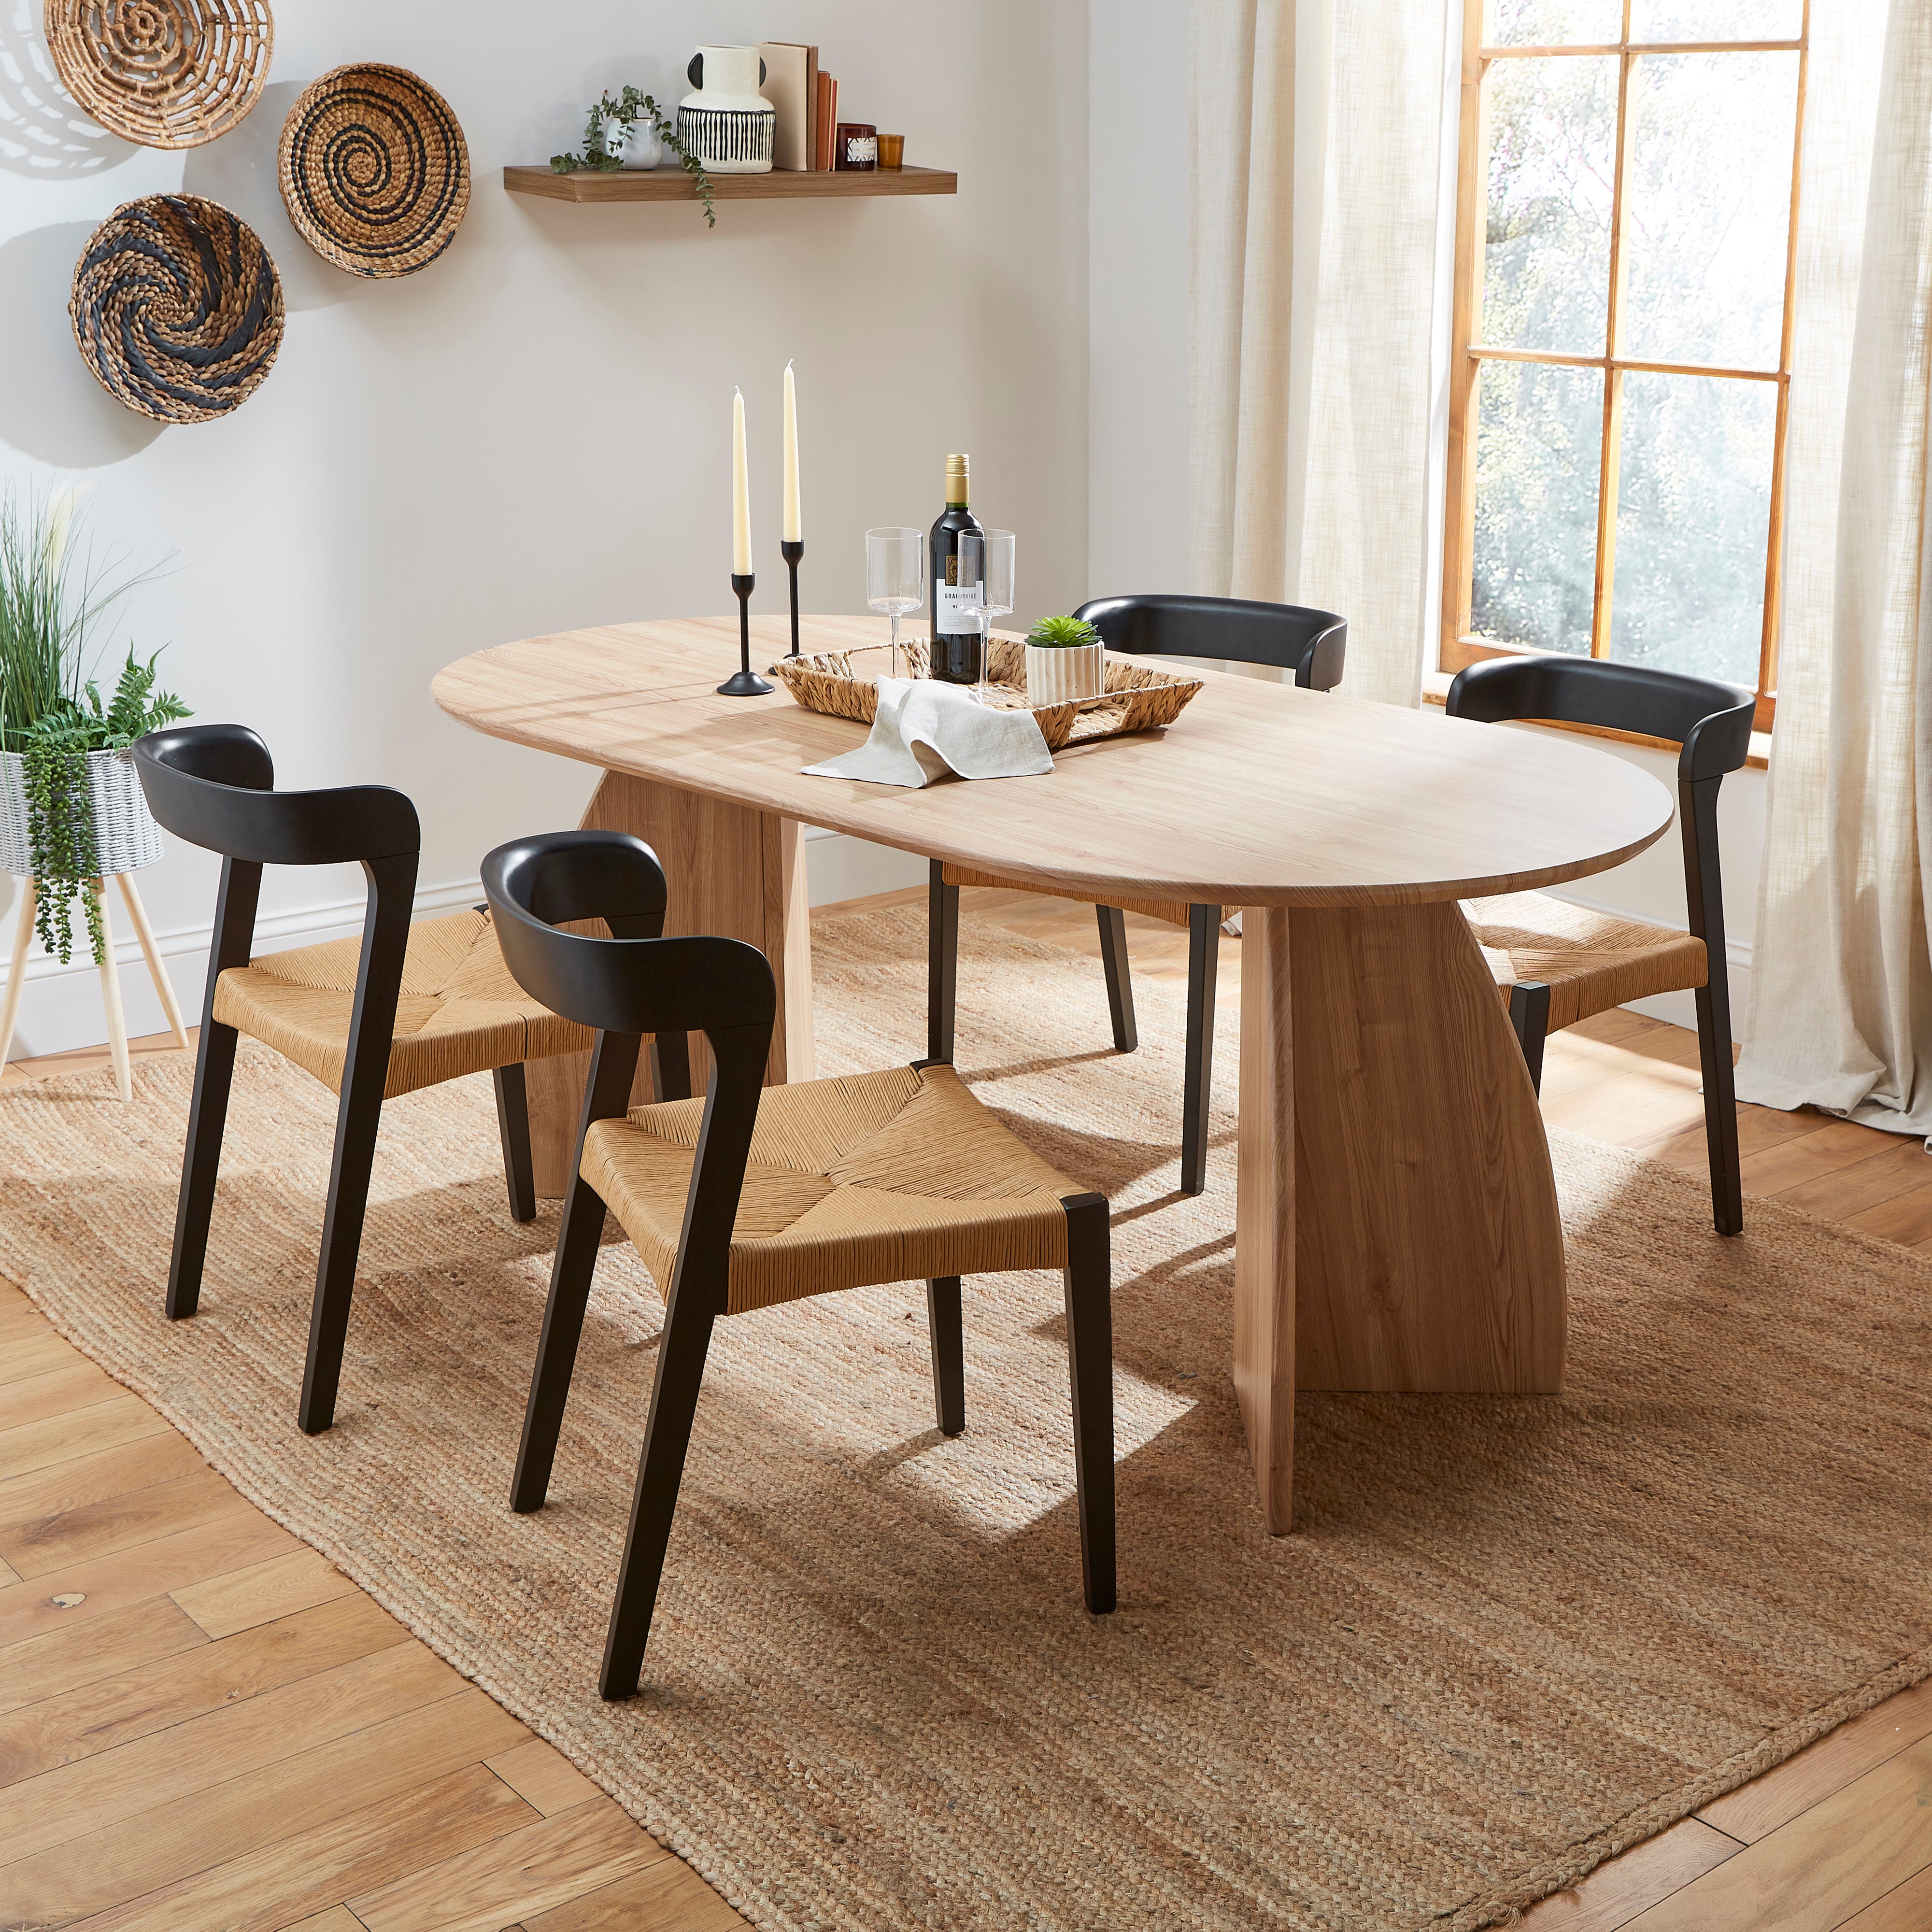 Effy 6 Seater Oval Dining Table Natural Wood Effect Natural